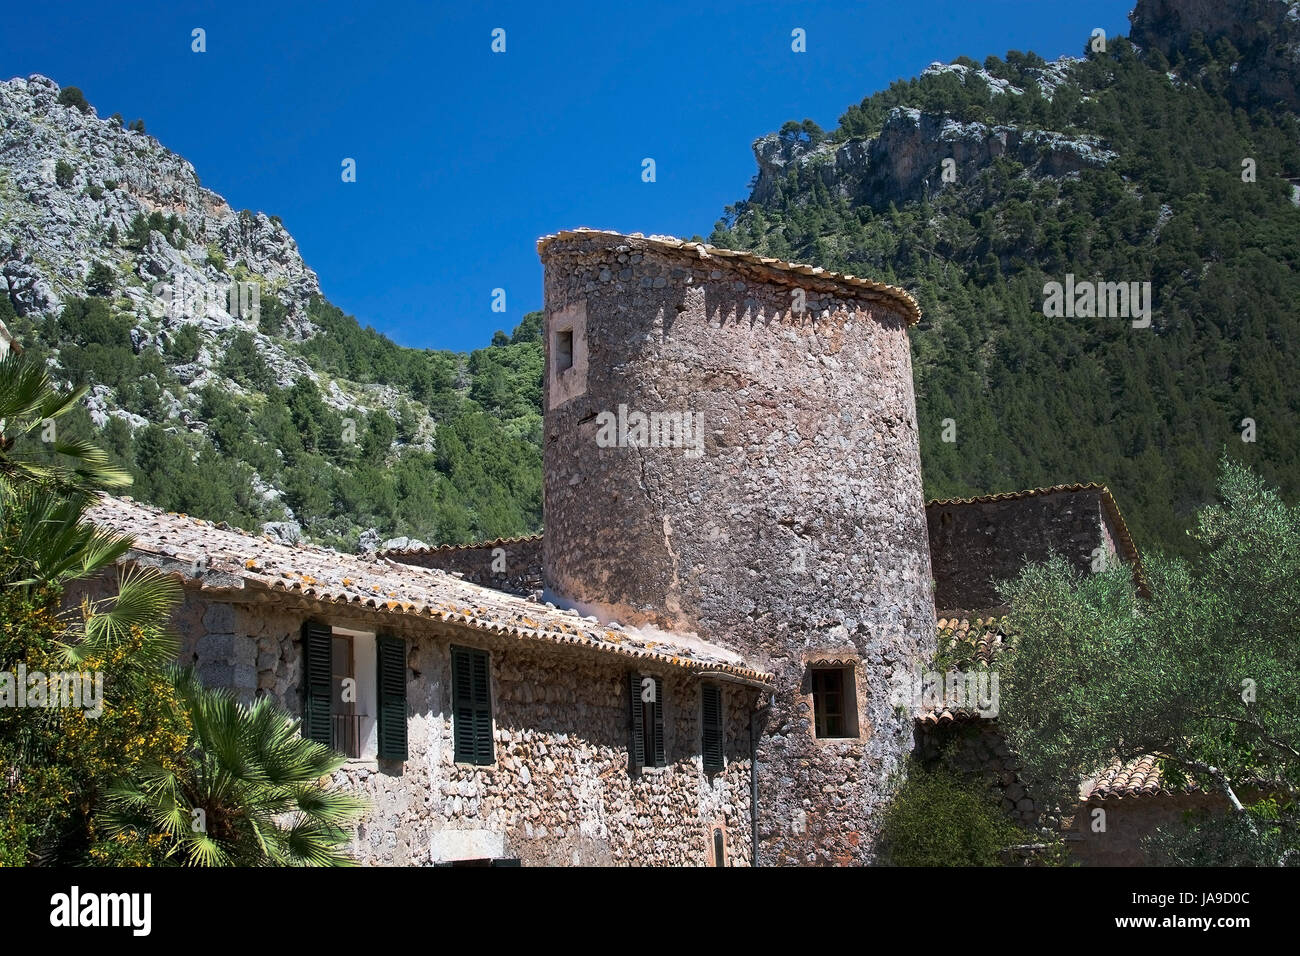 MALLORCA, SPAIN - MAY 15, 2017: Rustic stone building with tower in green subtropical garden in the Tramuntana mountains on May 15, 2017 in Mallorca,  Stock Photo